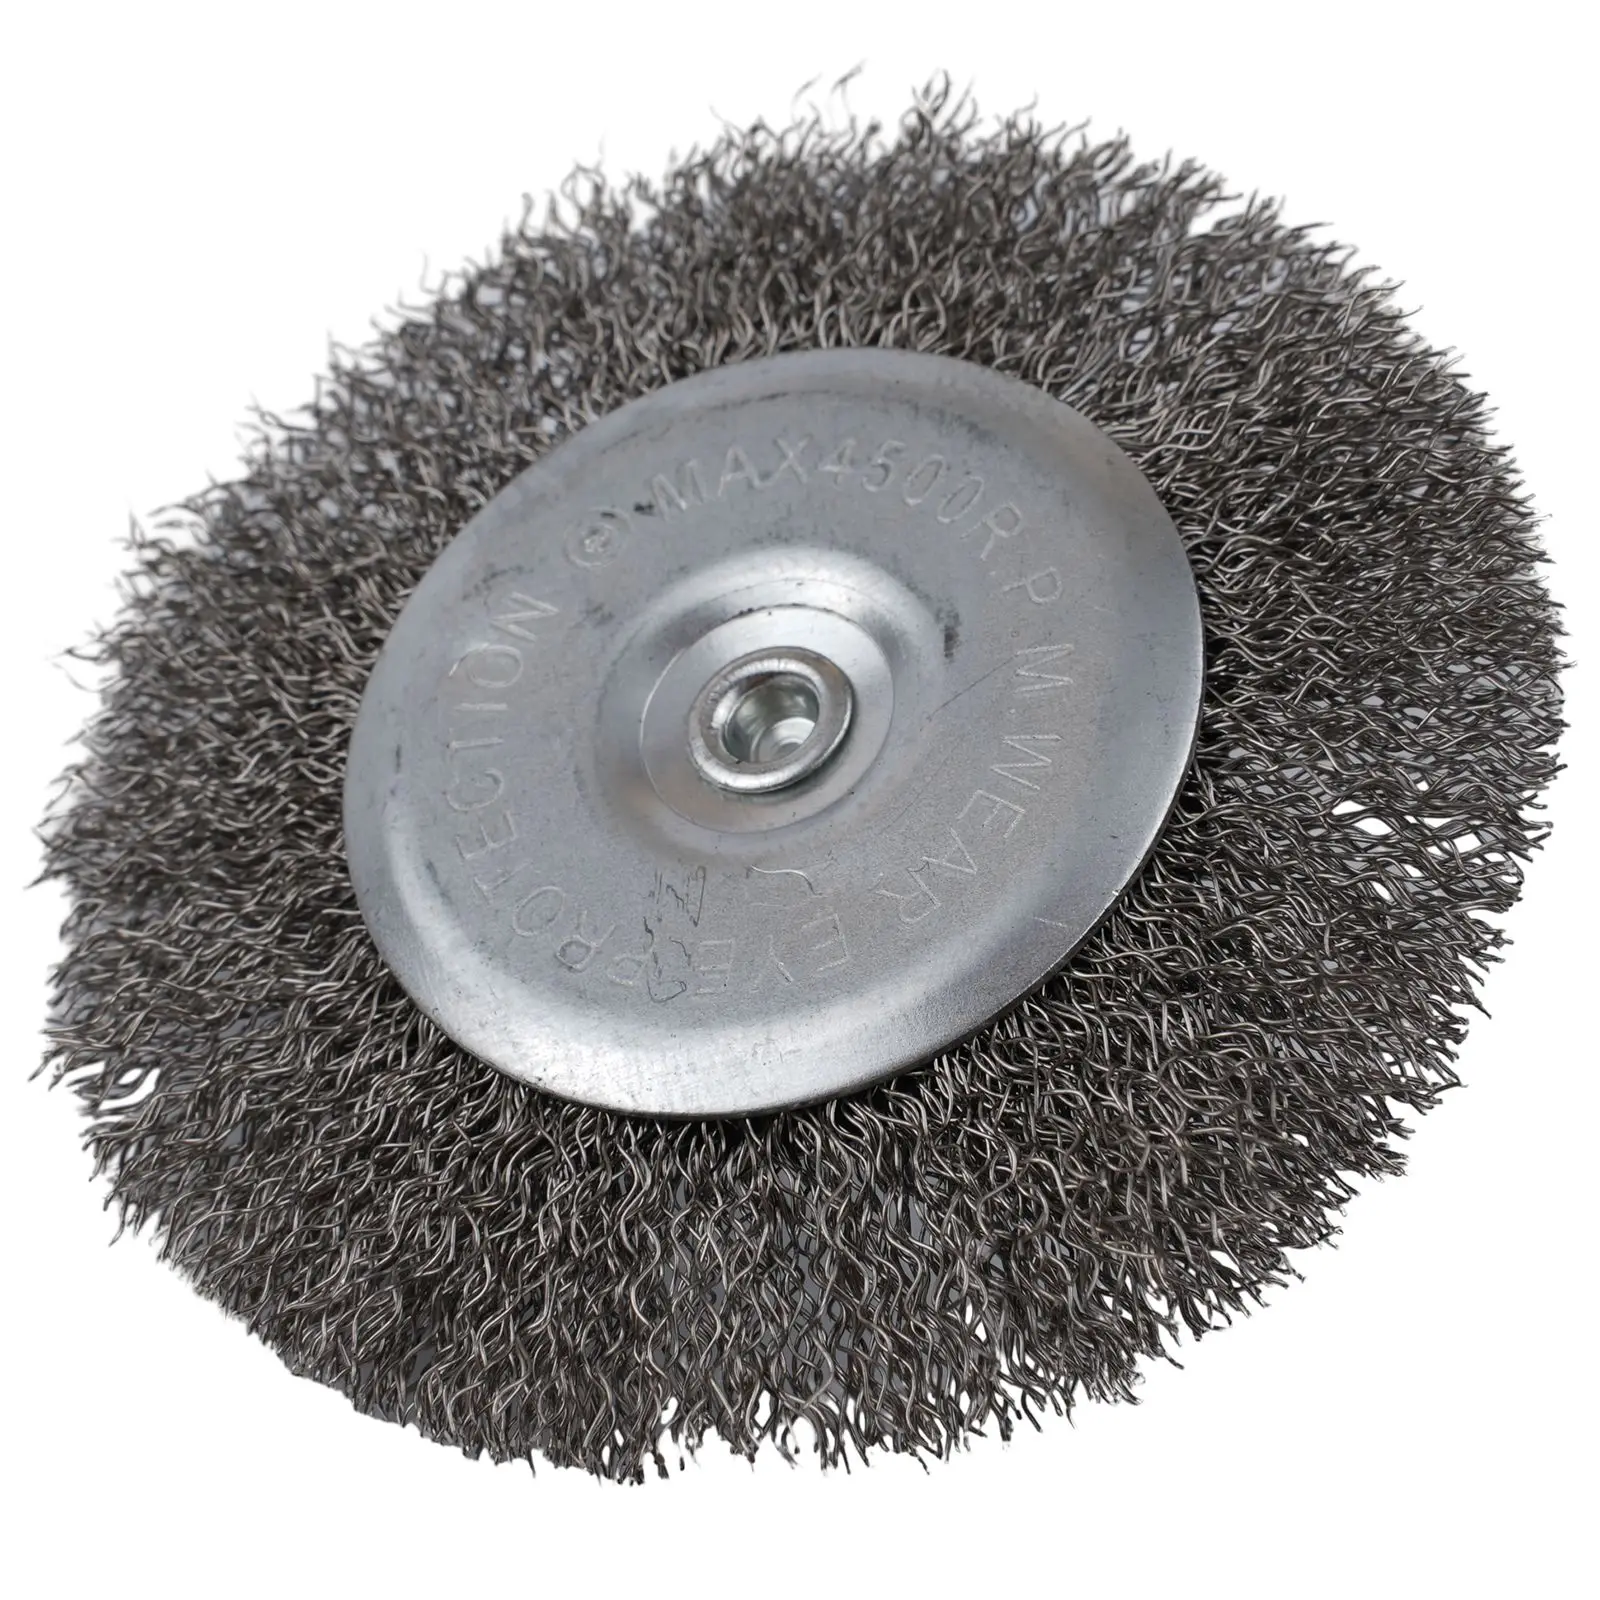 Joint Cleaner Electric Joint Brush 100mm Diameter 4pcs/Set Against Weeds Hexagonal Handle Replacement Workshop